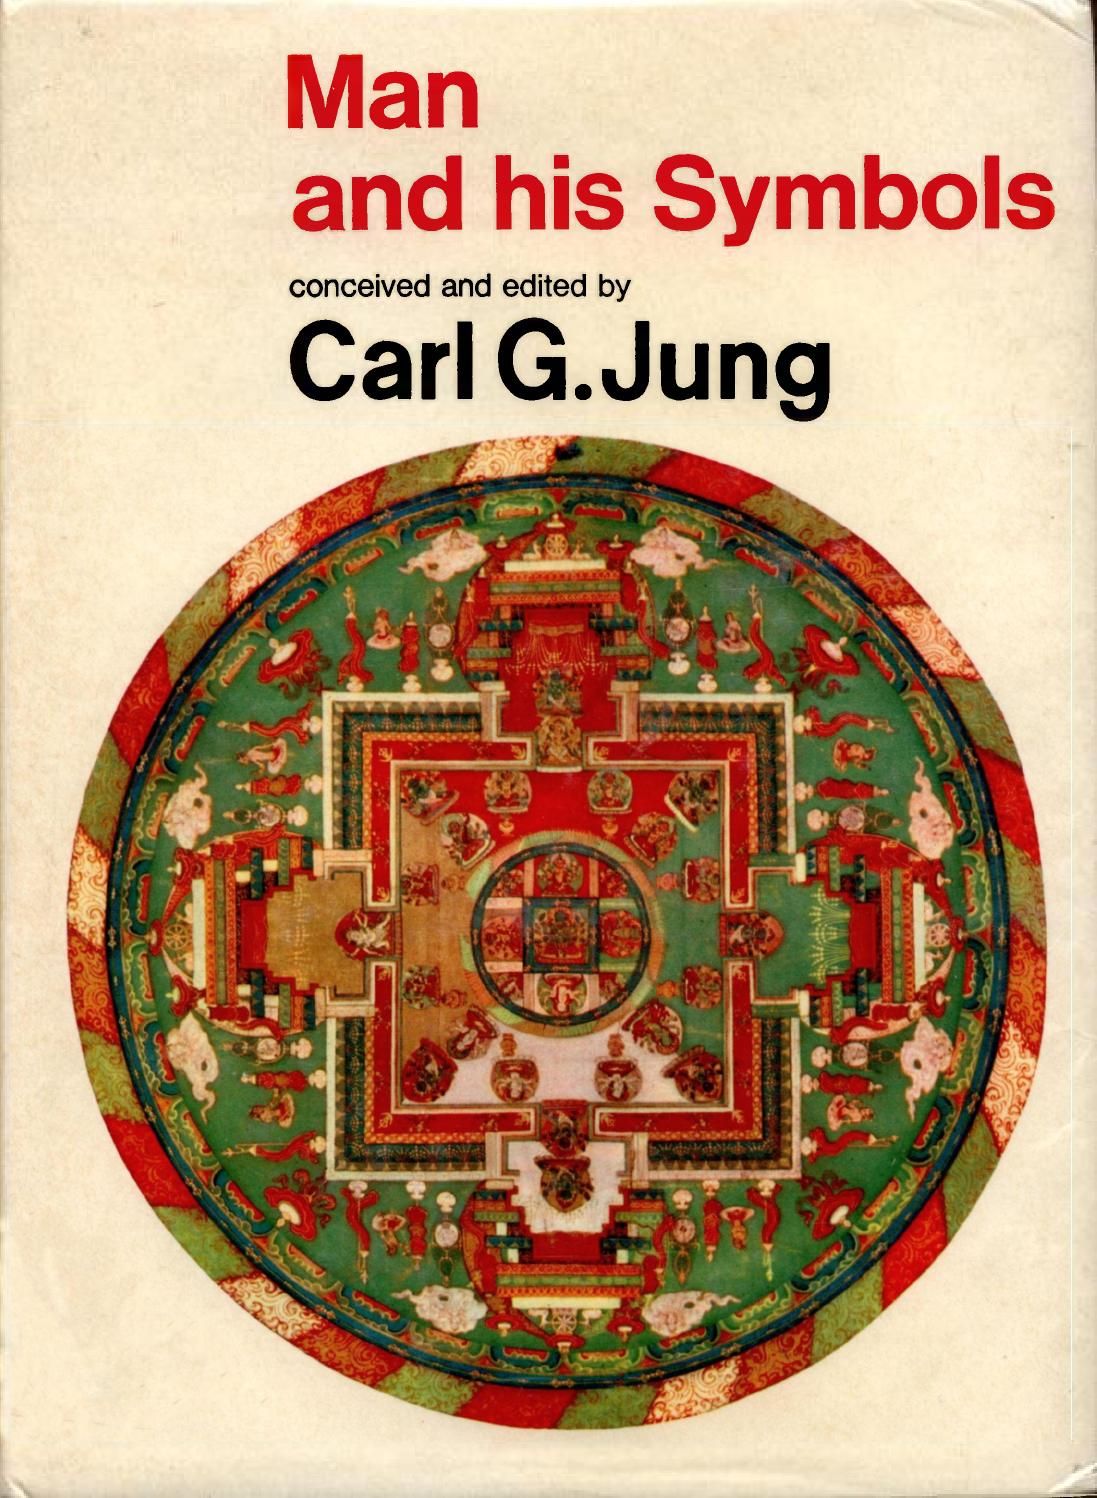 Approaching The Unconscious By C.G. Jung